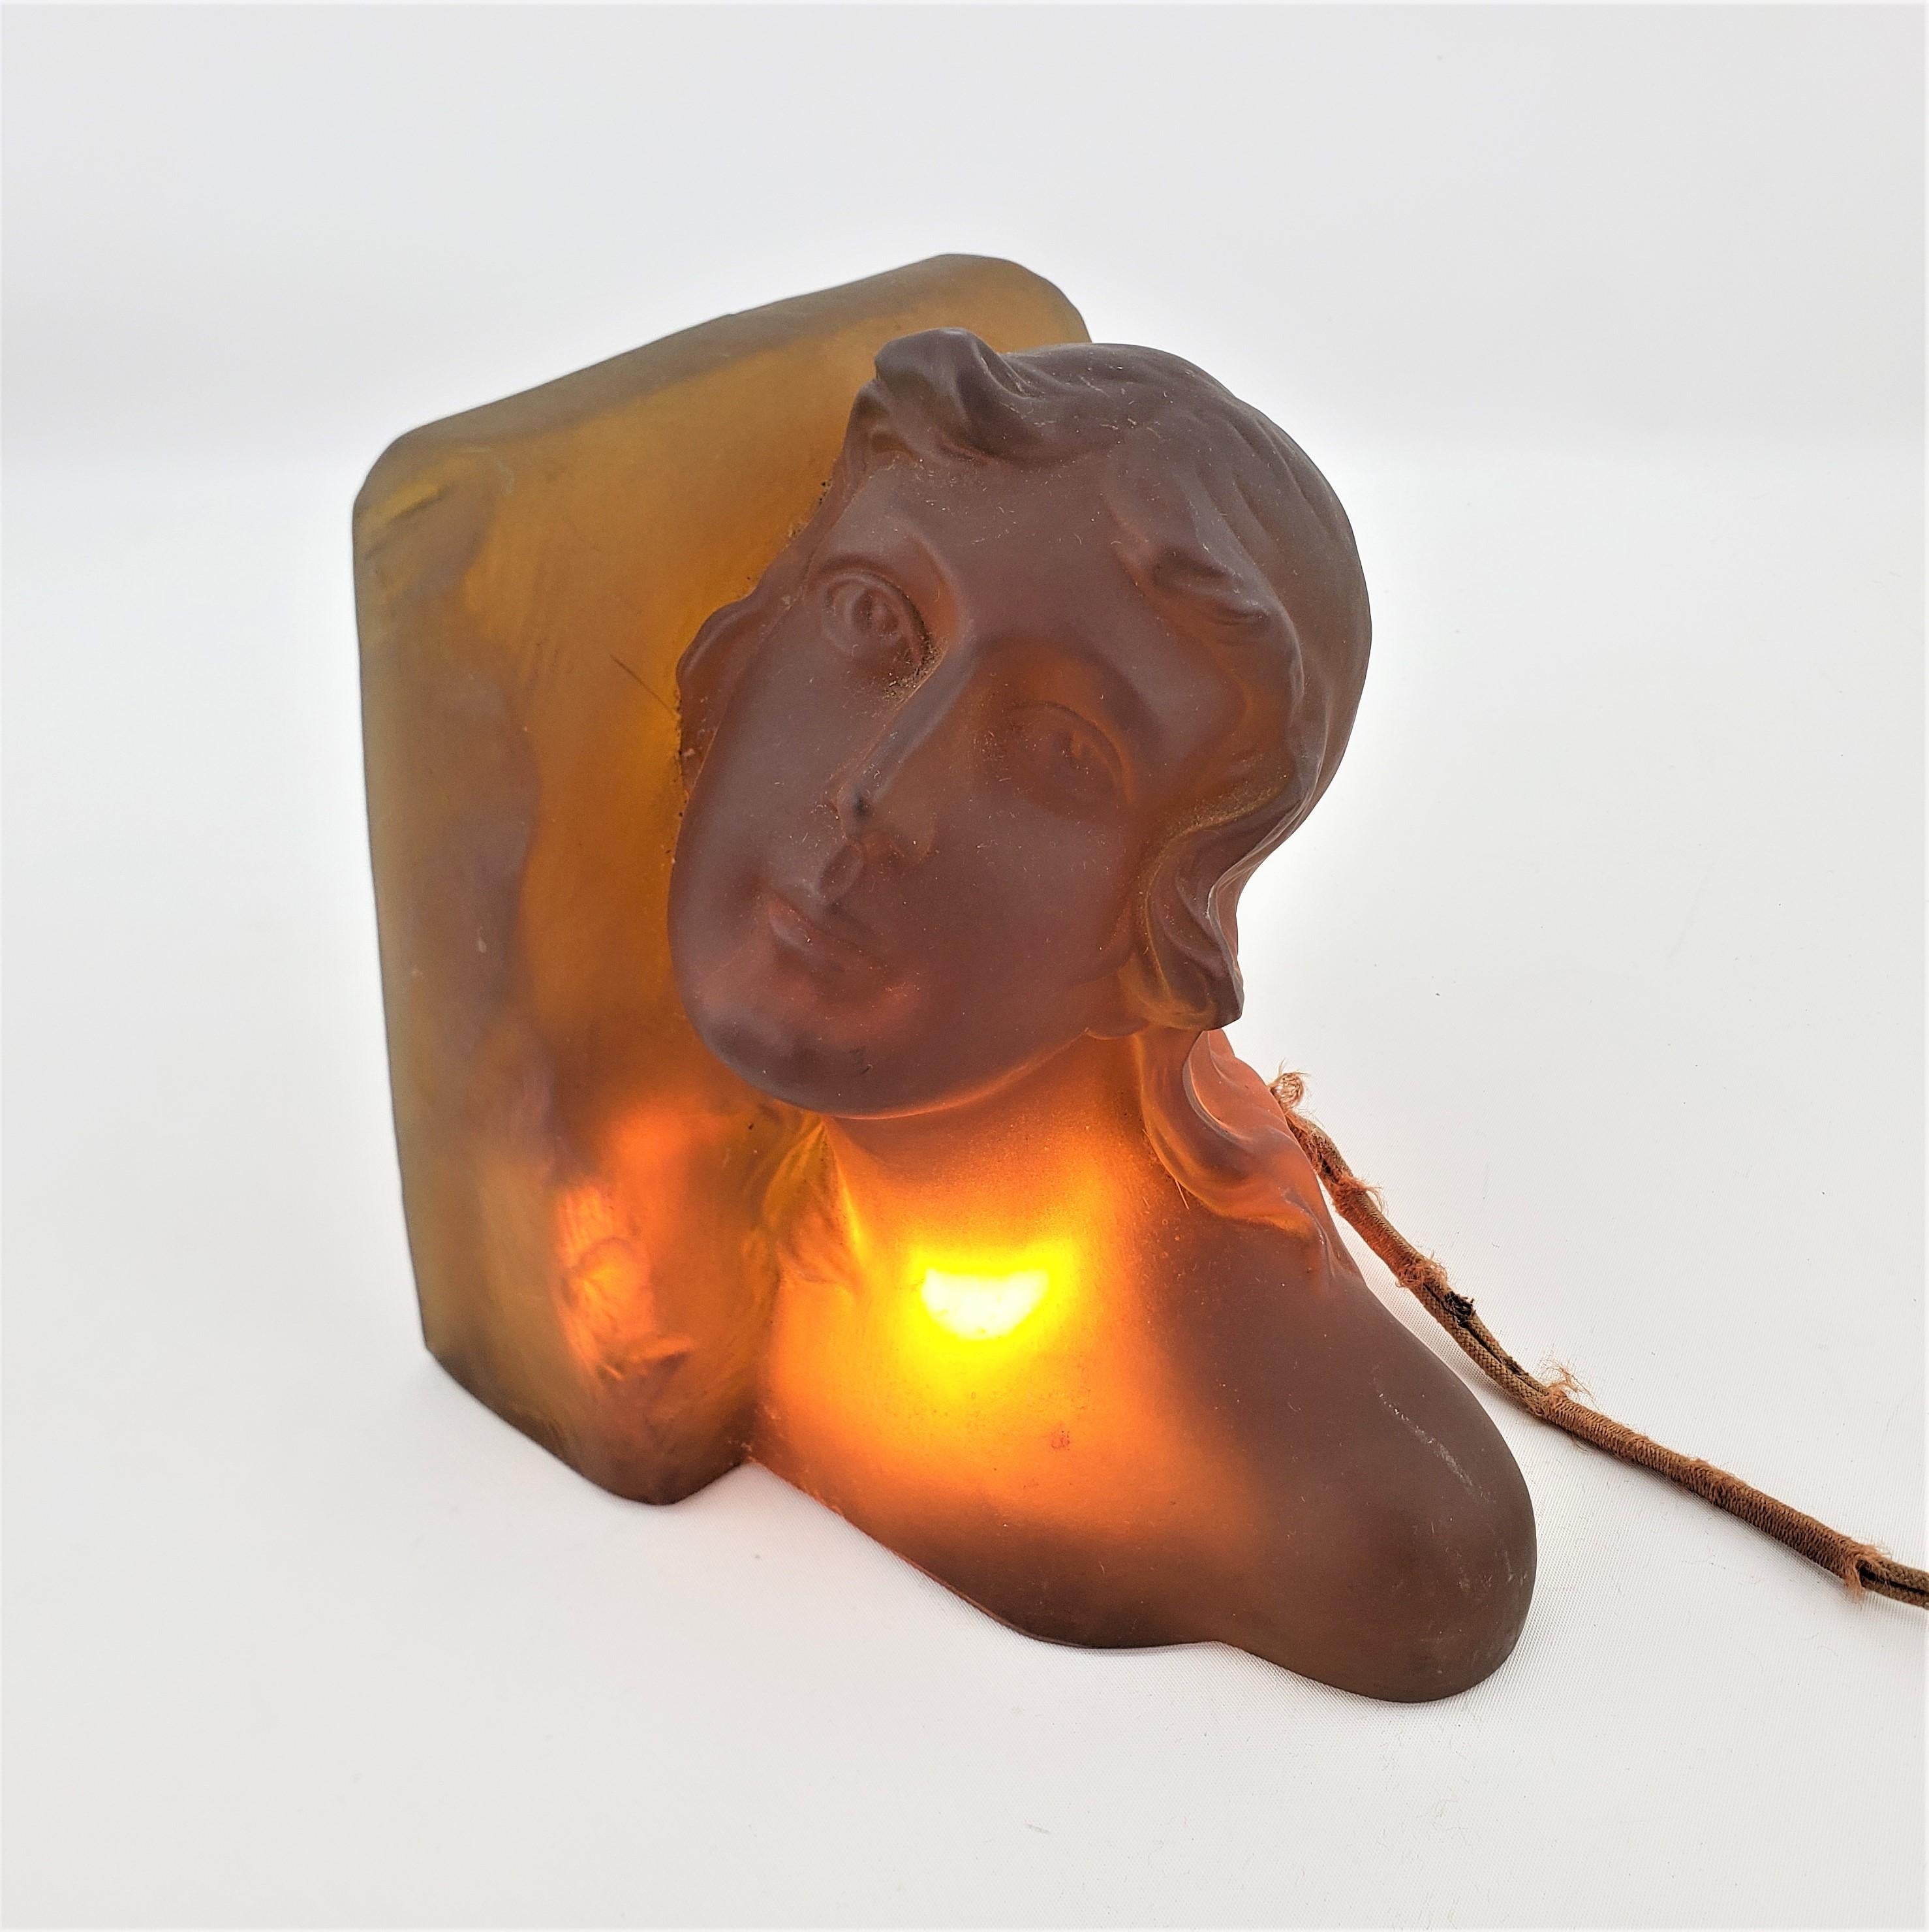 Czech Art Deco Heavy Amber Glass Figural Female Bust Table Accent Lamp or Sculpture For Sale